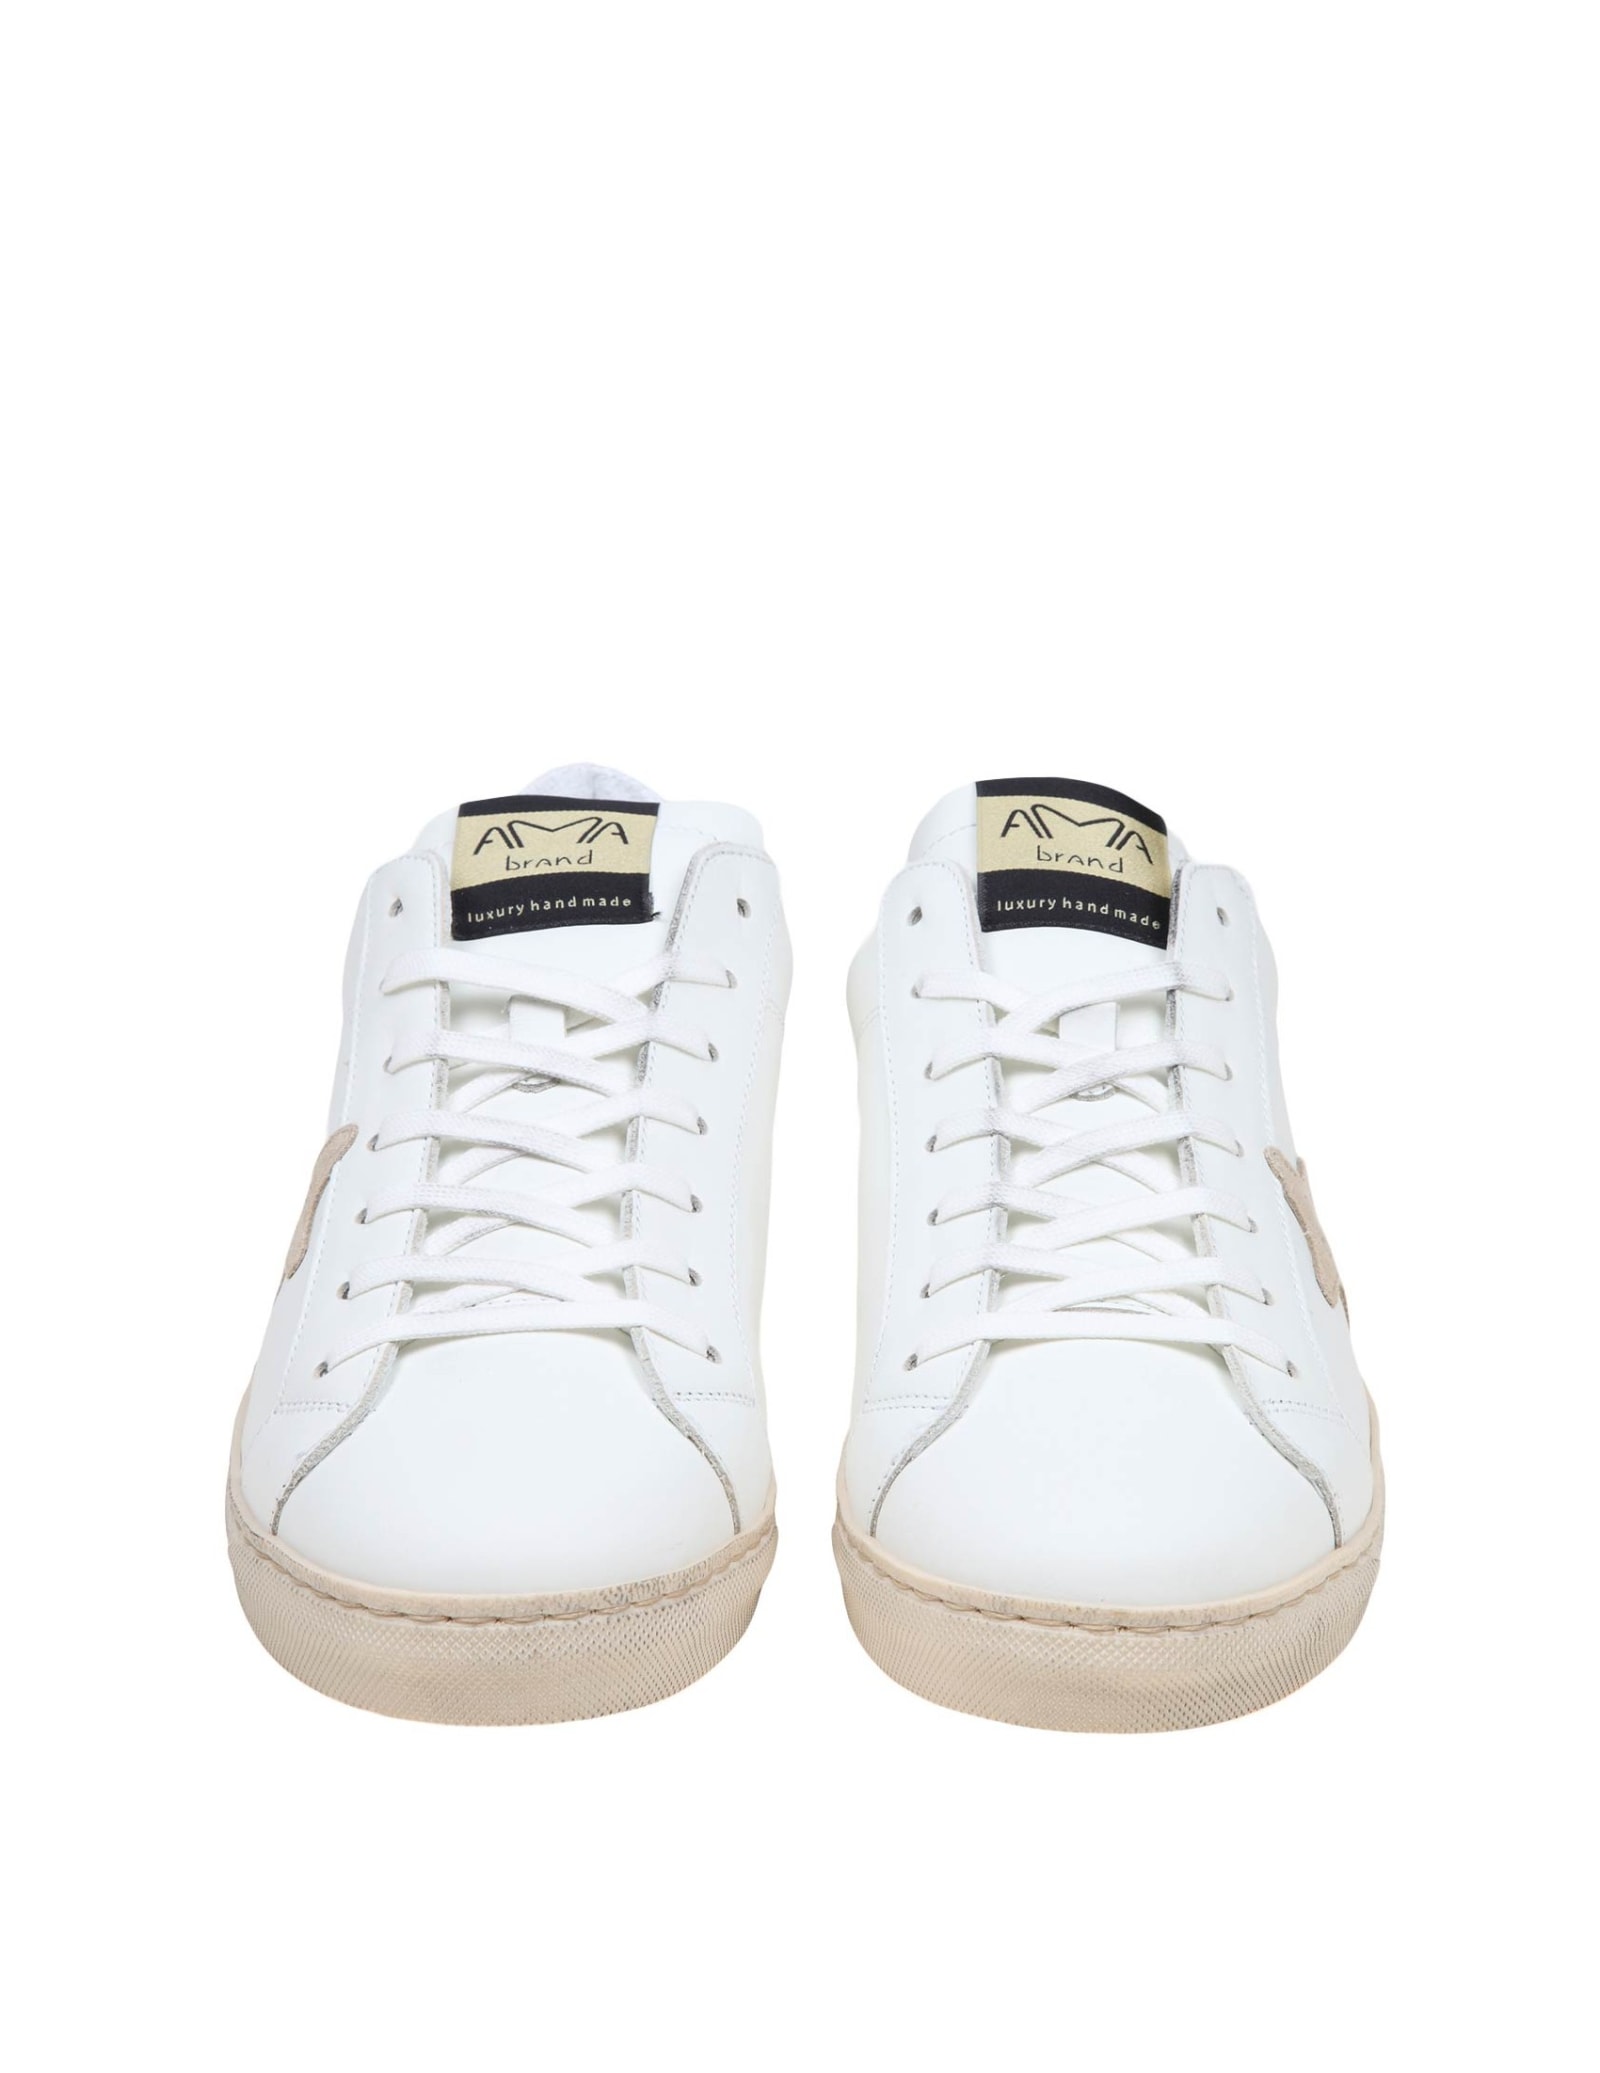 Shop Ama Brand White And Taupe Leather Sneakers In White/taupe